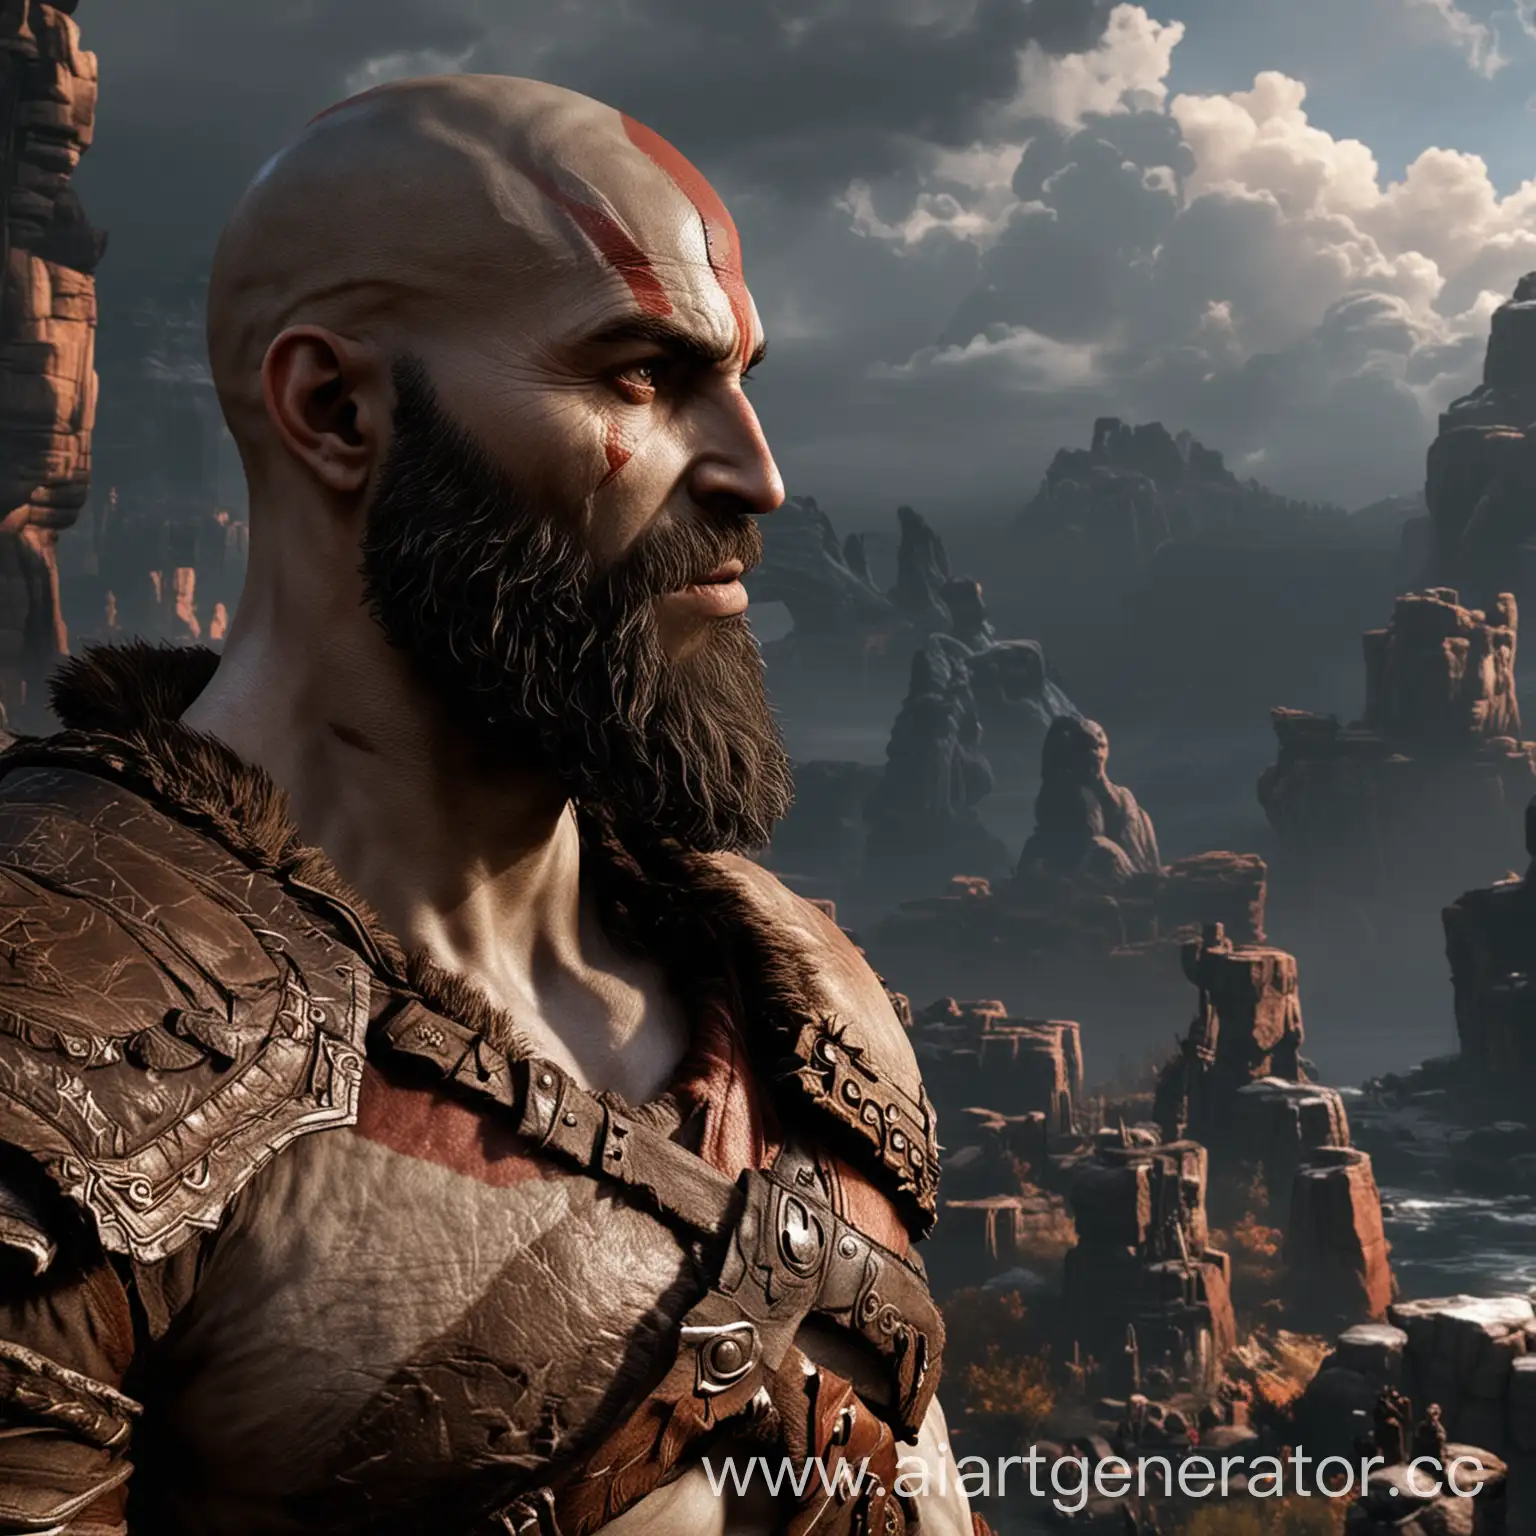 the main character of the game god of war looks into the distance
